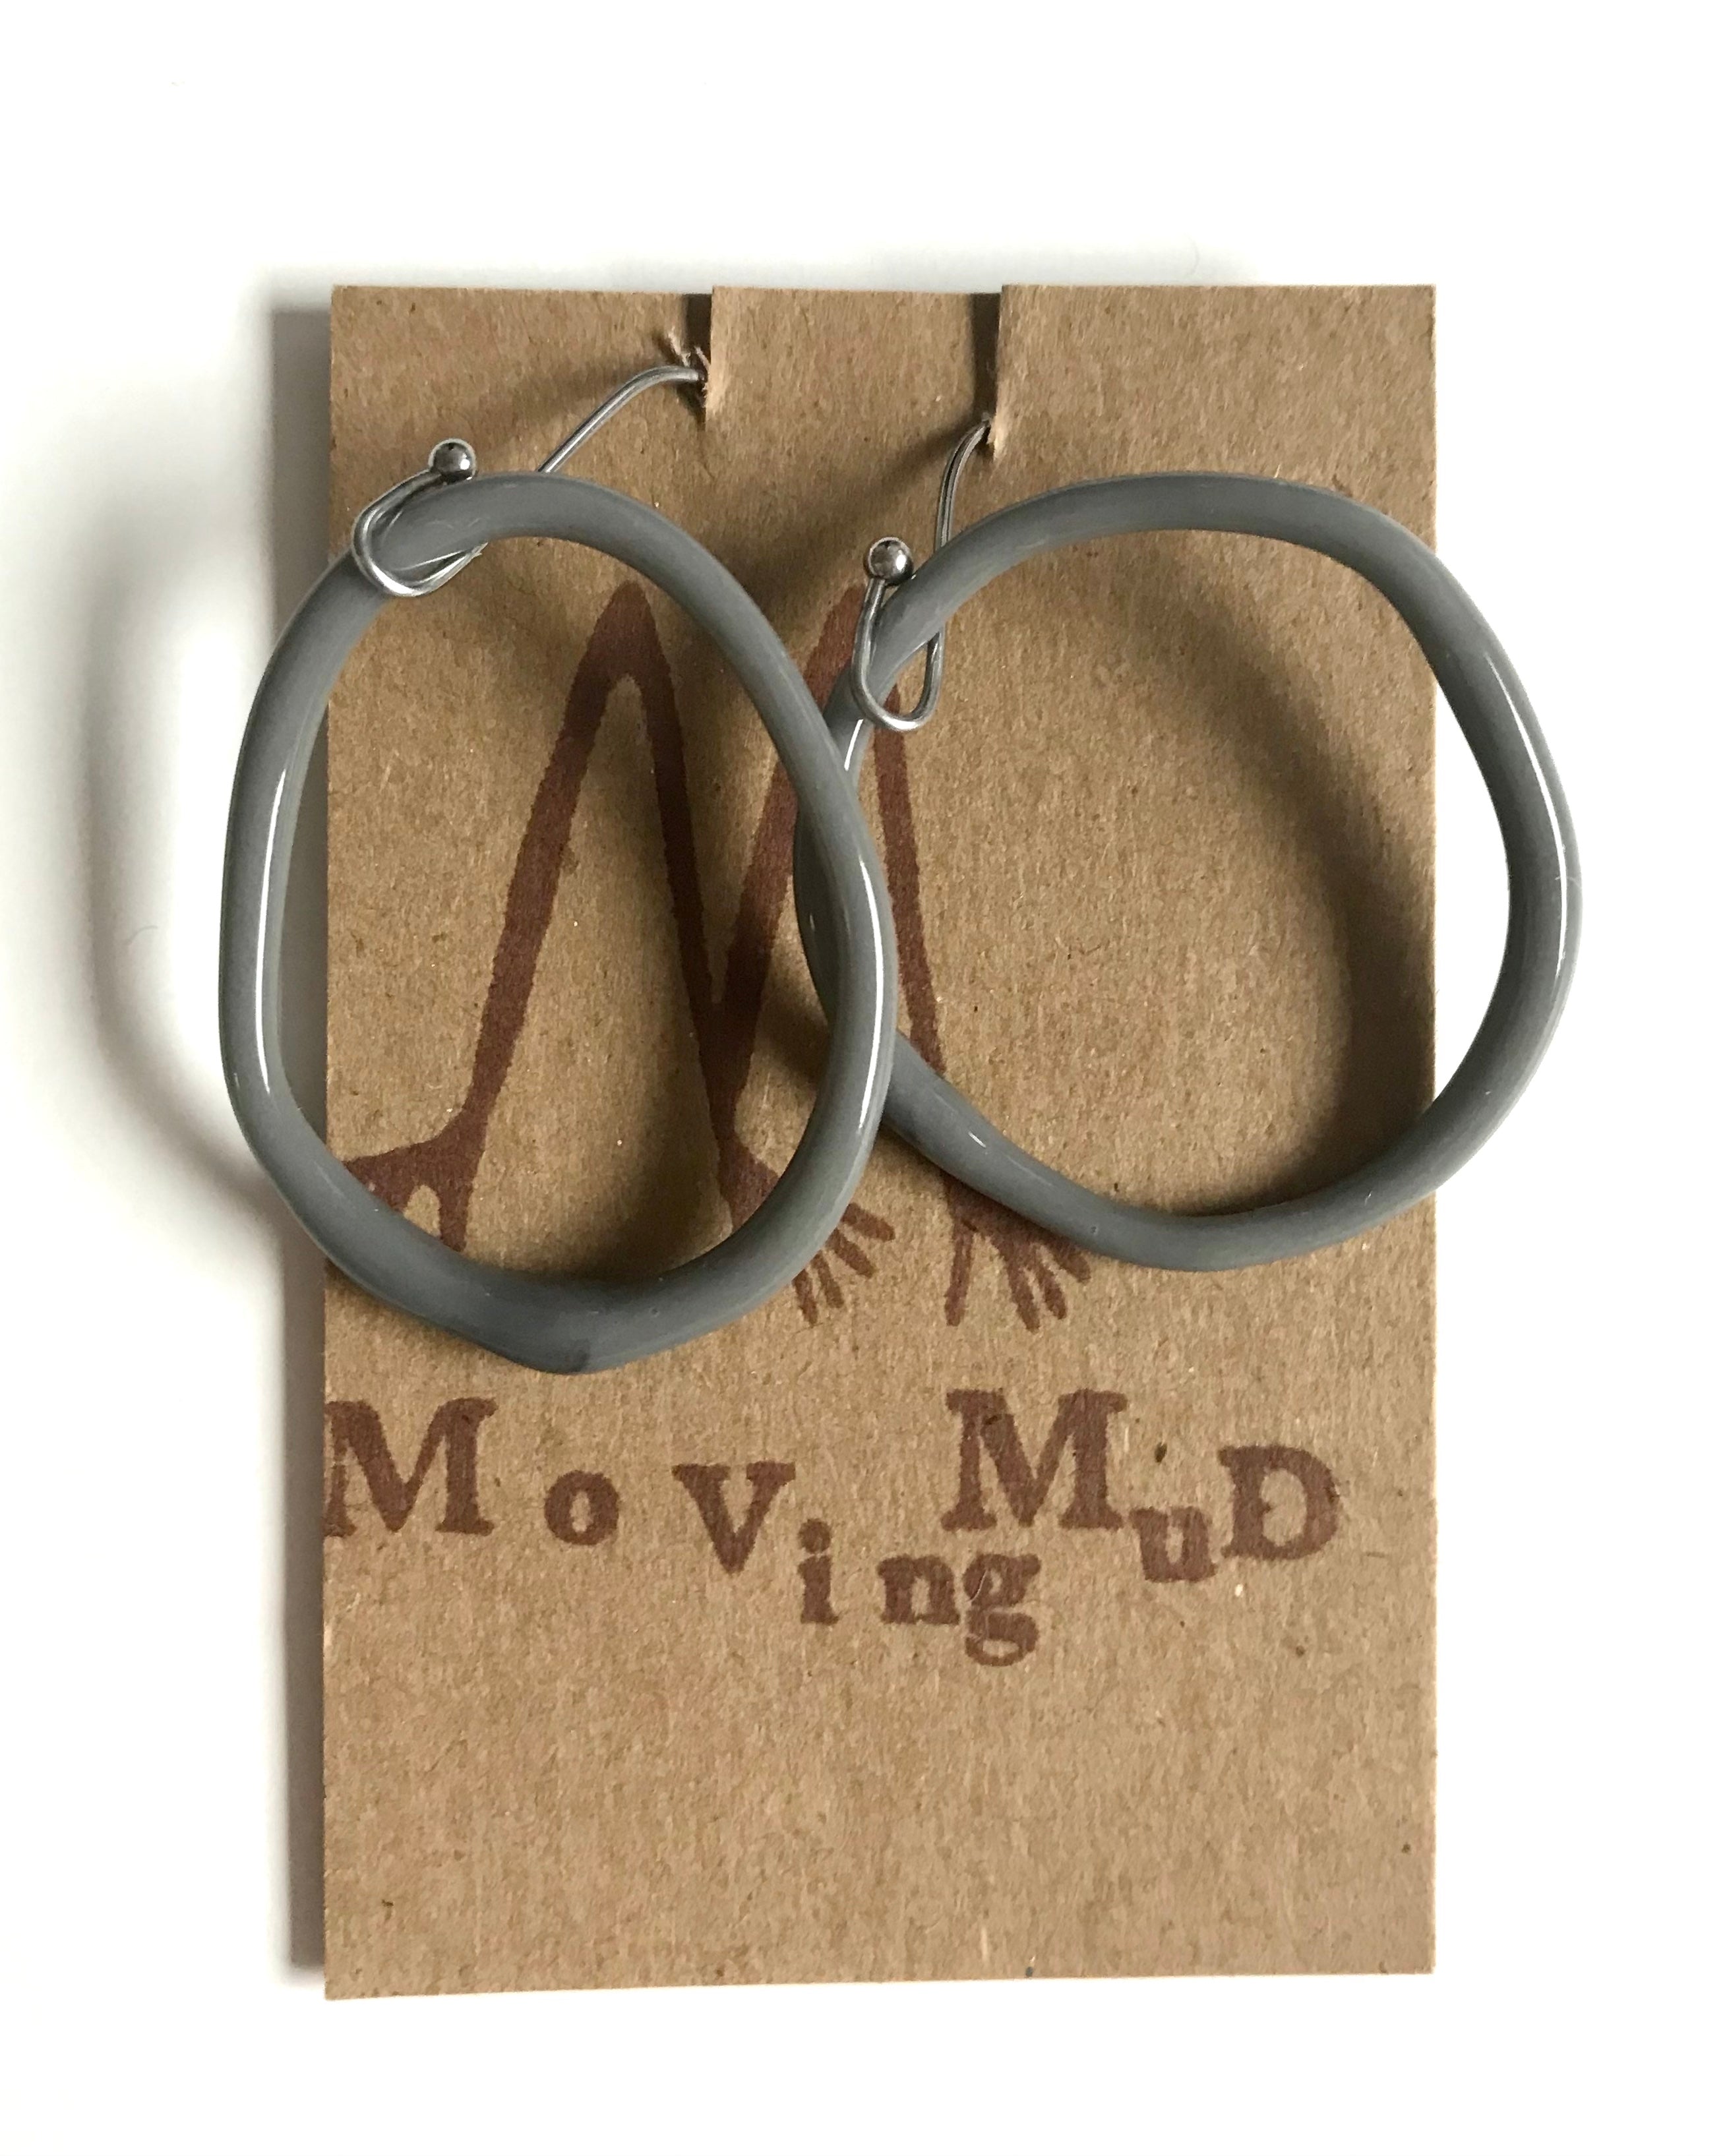 Moving Mud Handcrafted Glass Earrings